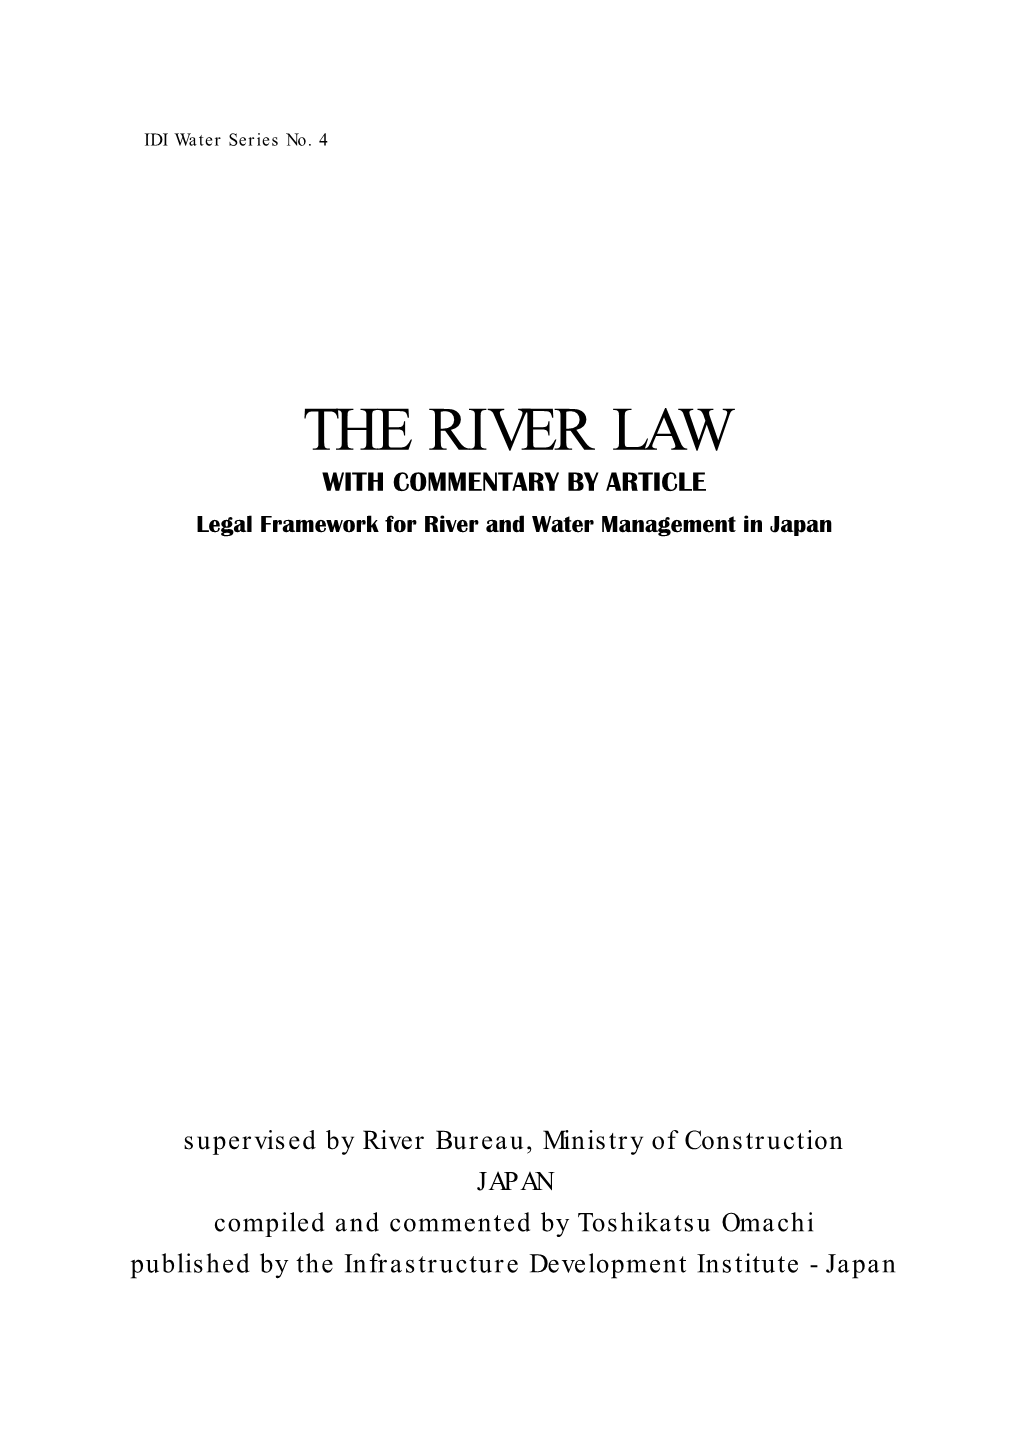 THE RIVER LAW with COMMENTARY by ARTICLE Legal Framework for River and Water Management in Japan